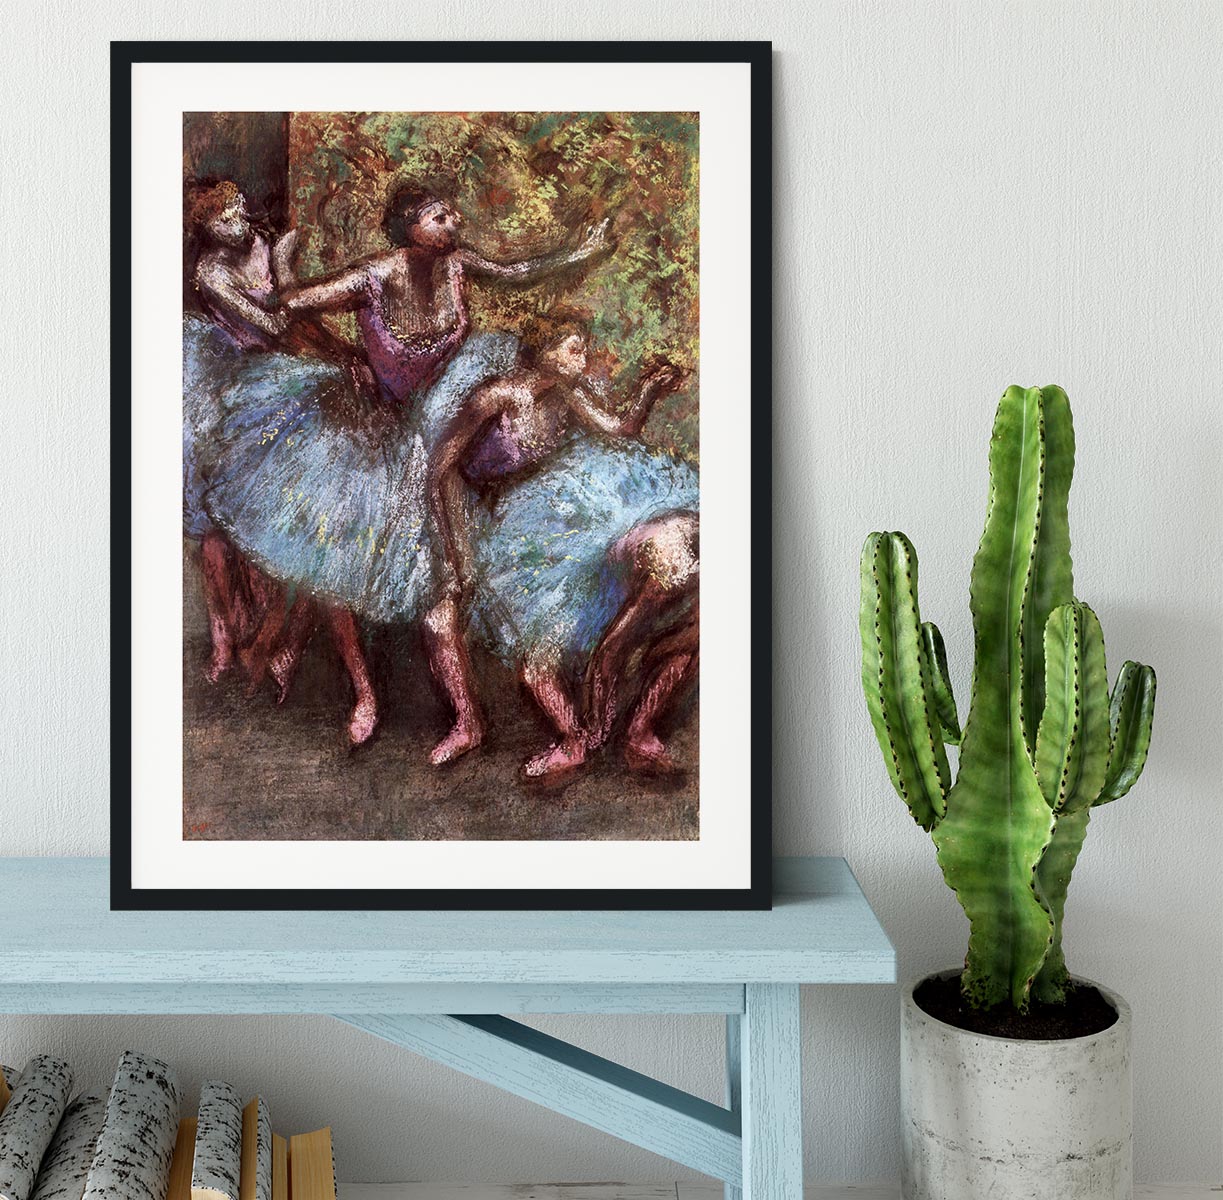 Four dancers behind the scenes 1 by Degas Framed Print - Canvas Art Rocks - 1